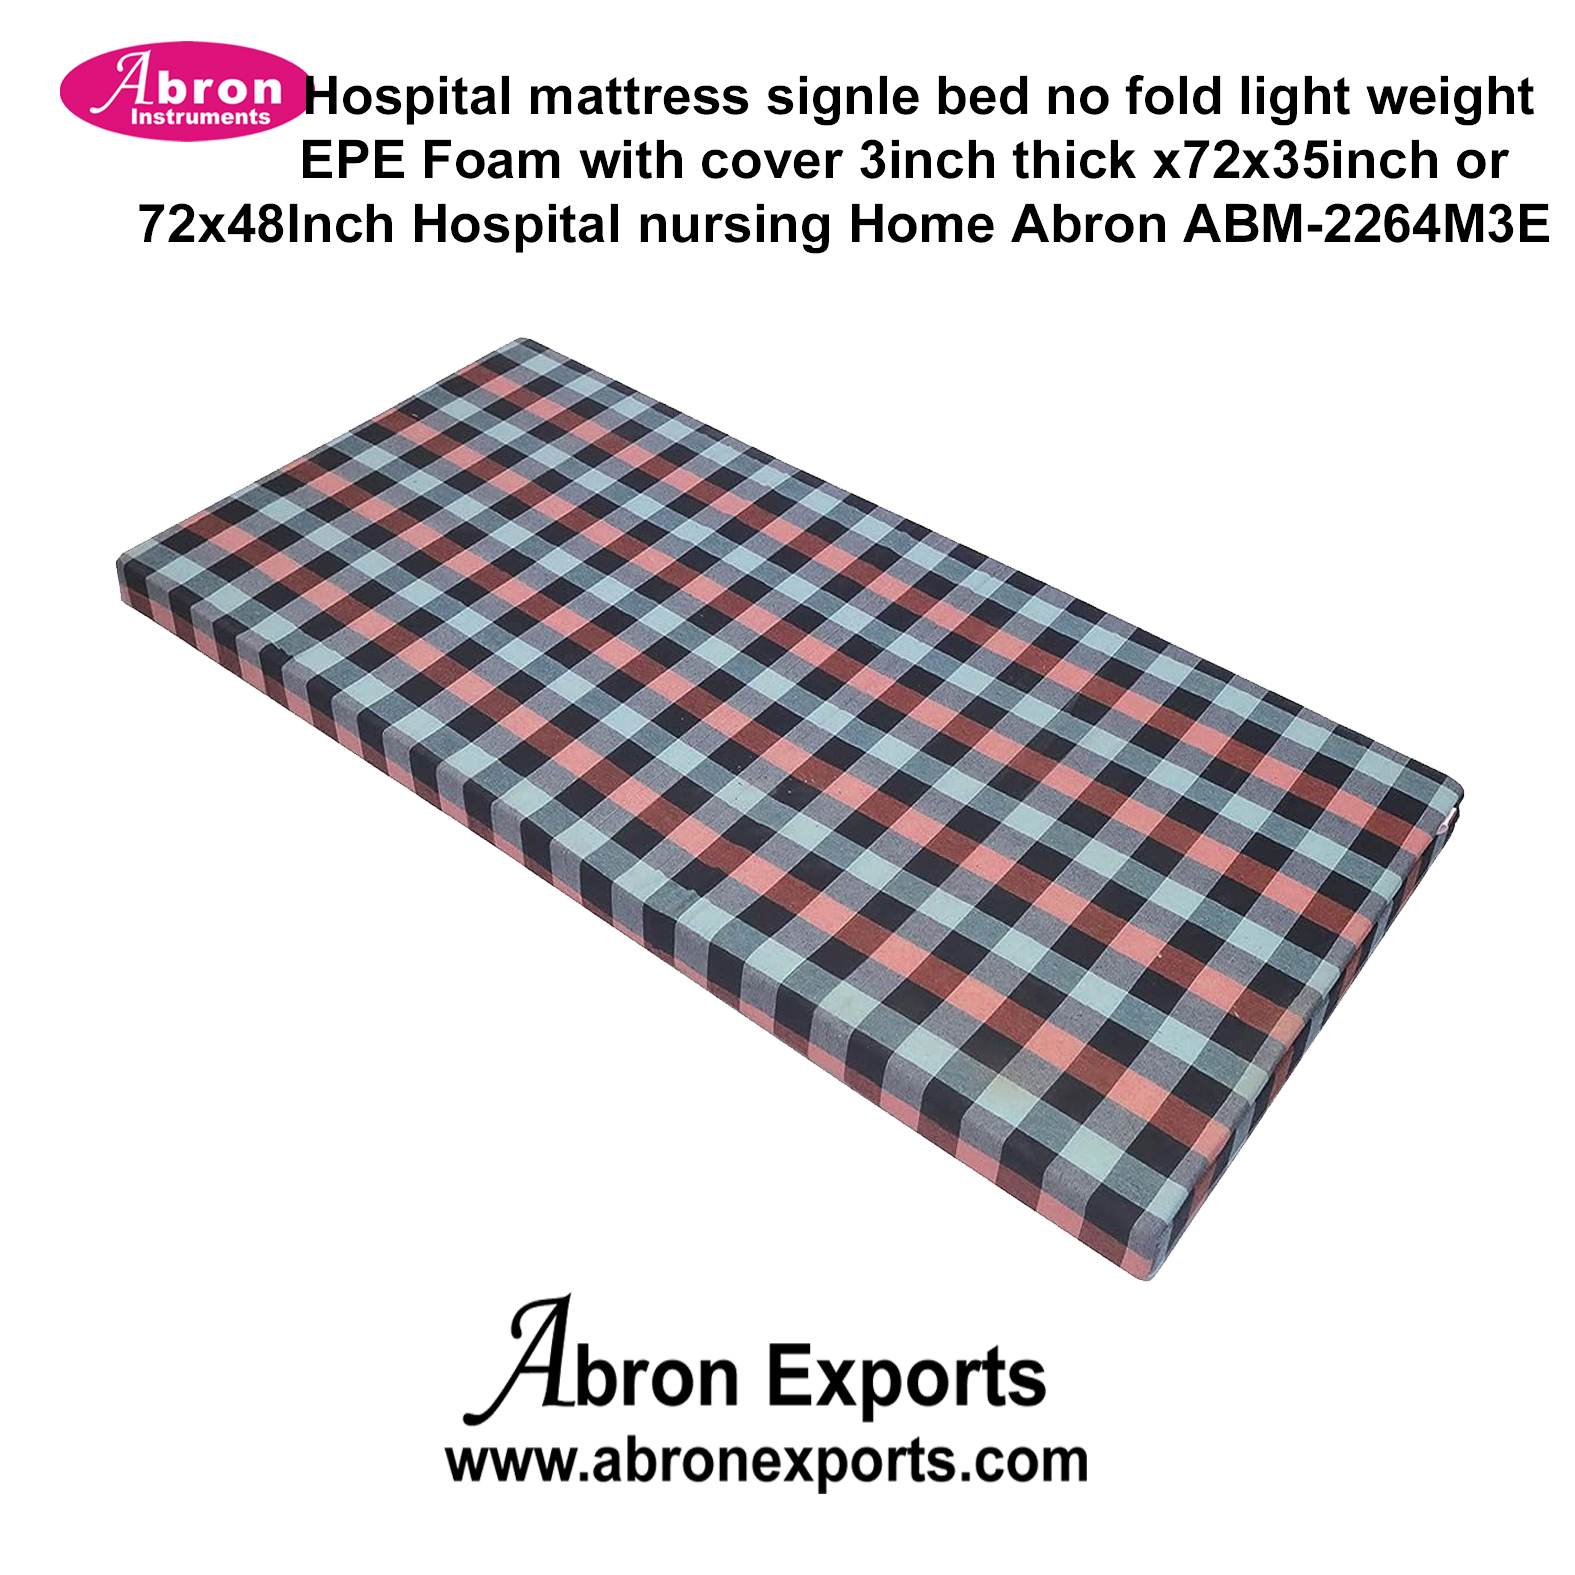 Hospital Mattress Signle Bed No Fold Light Weight EPE Foam With Cover 3 inch Thick x72x35 inch or 72x48 Inch Hospital Nursing Home Abron ABM-2264M3E 